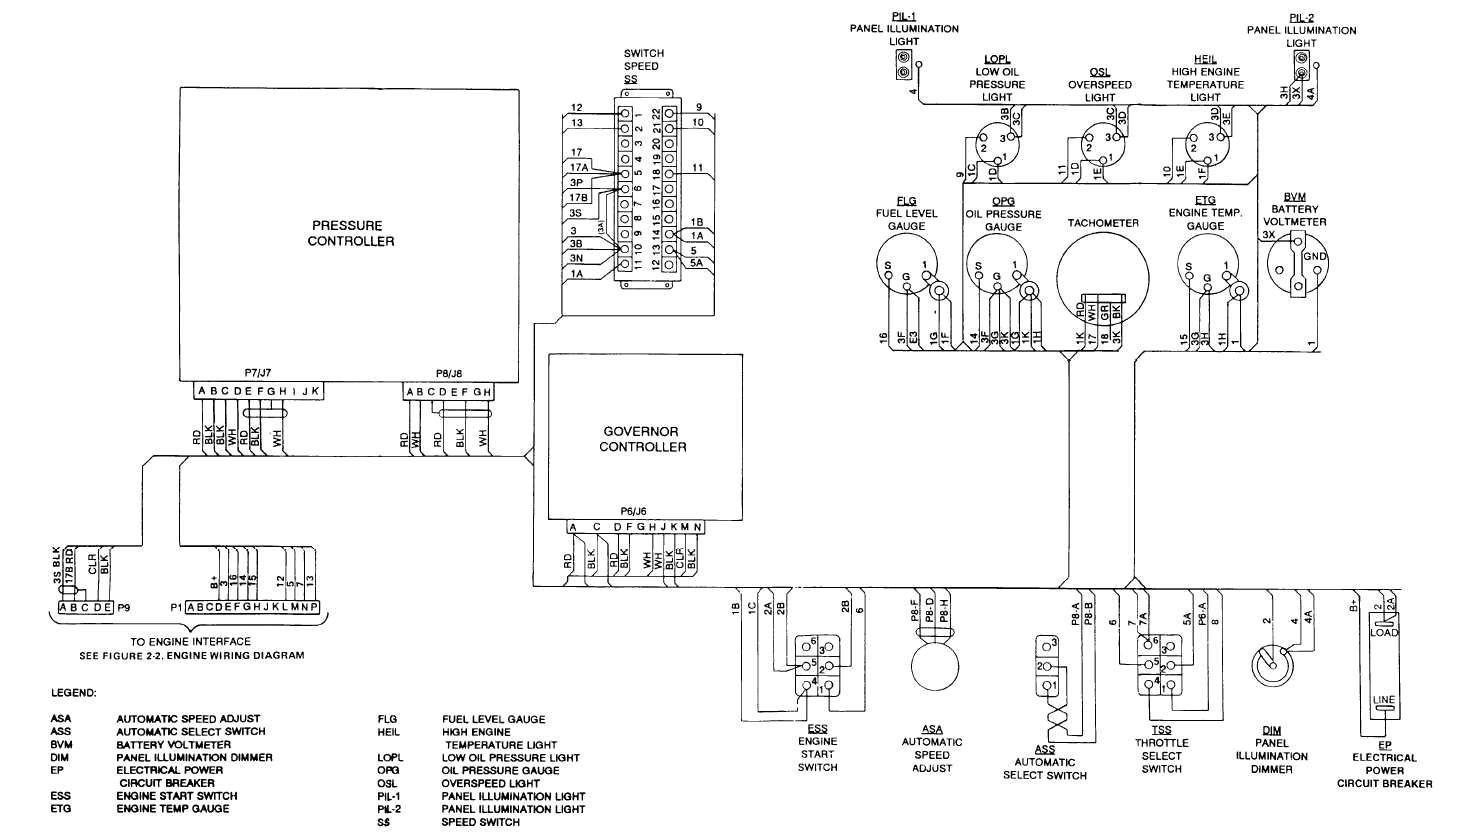 control cabinet wiring diagram wiring diagramcontrol cabinet wire diagram wiring diagram centrefigure 2 1 control panel